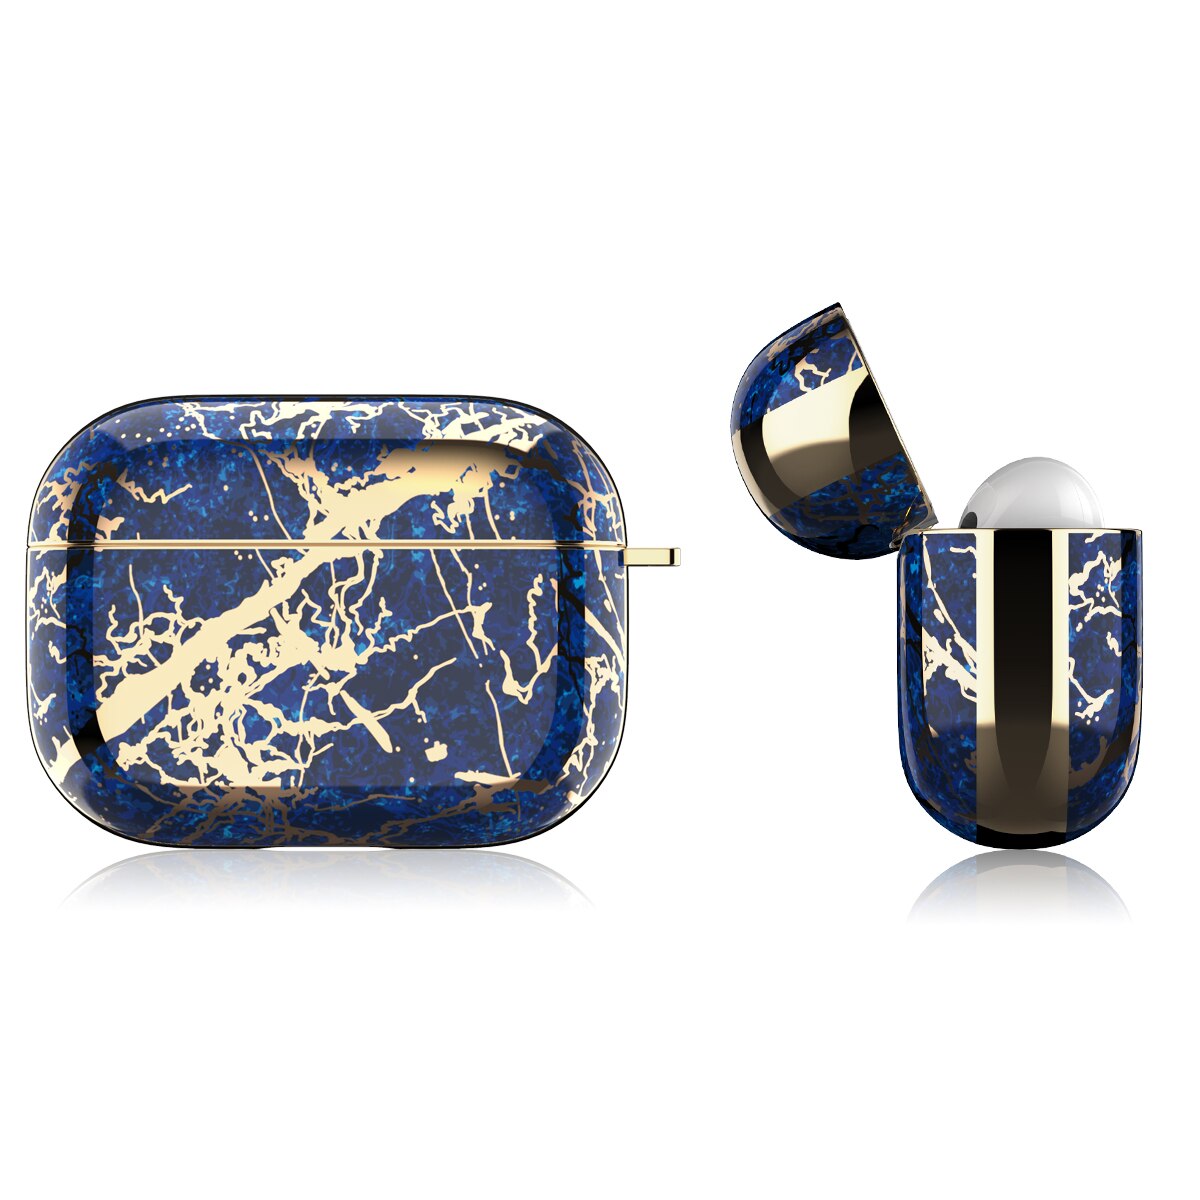 Abstract AirPods Case - Vox Megastore